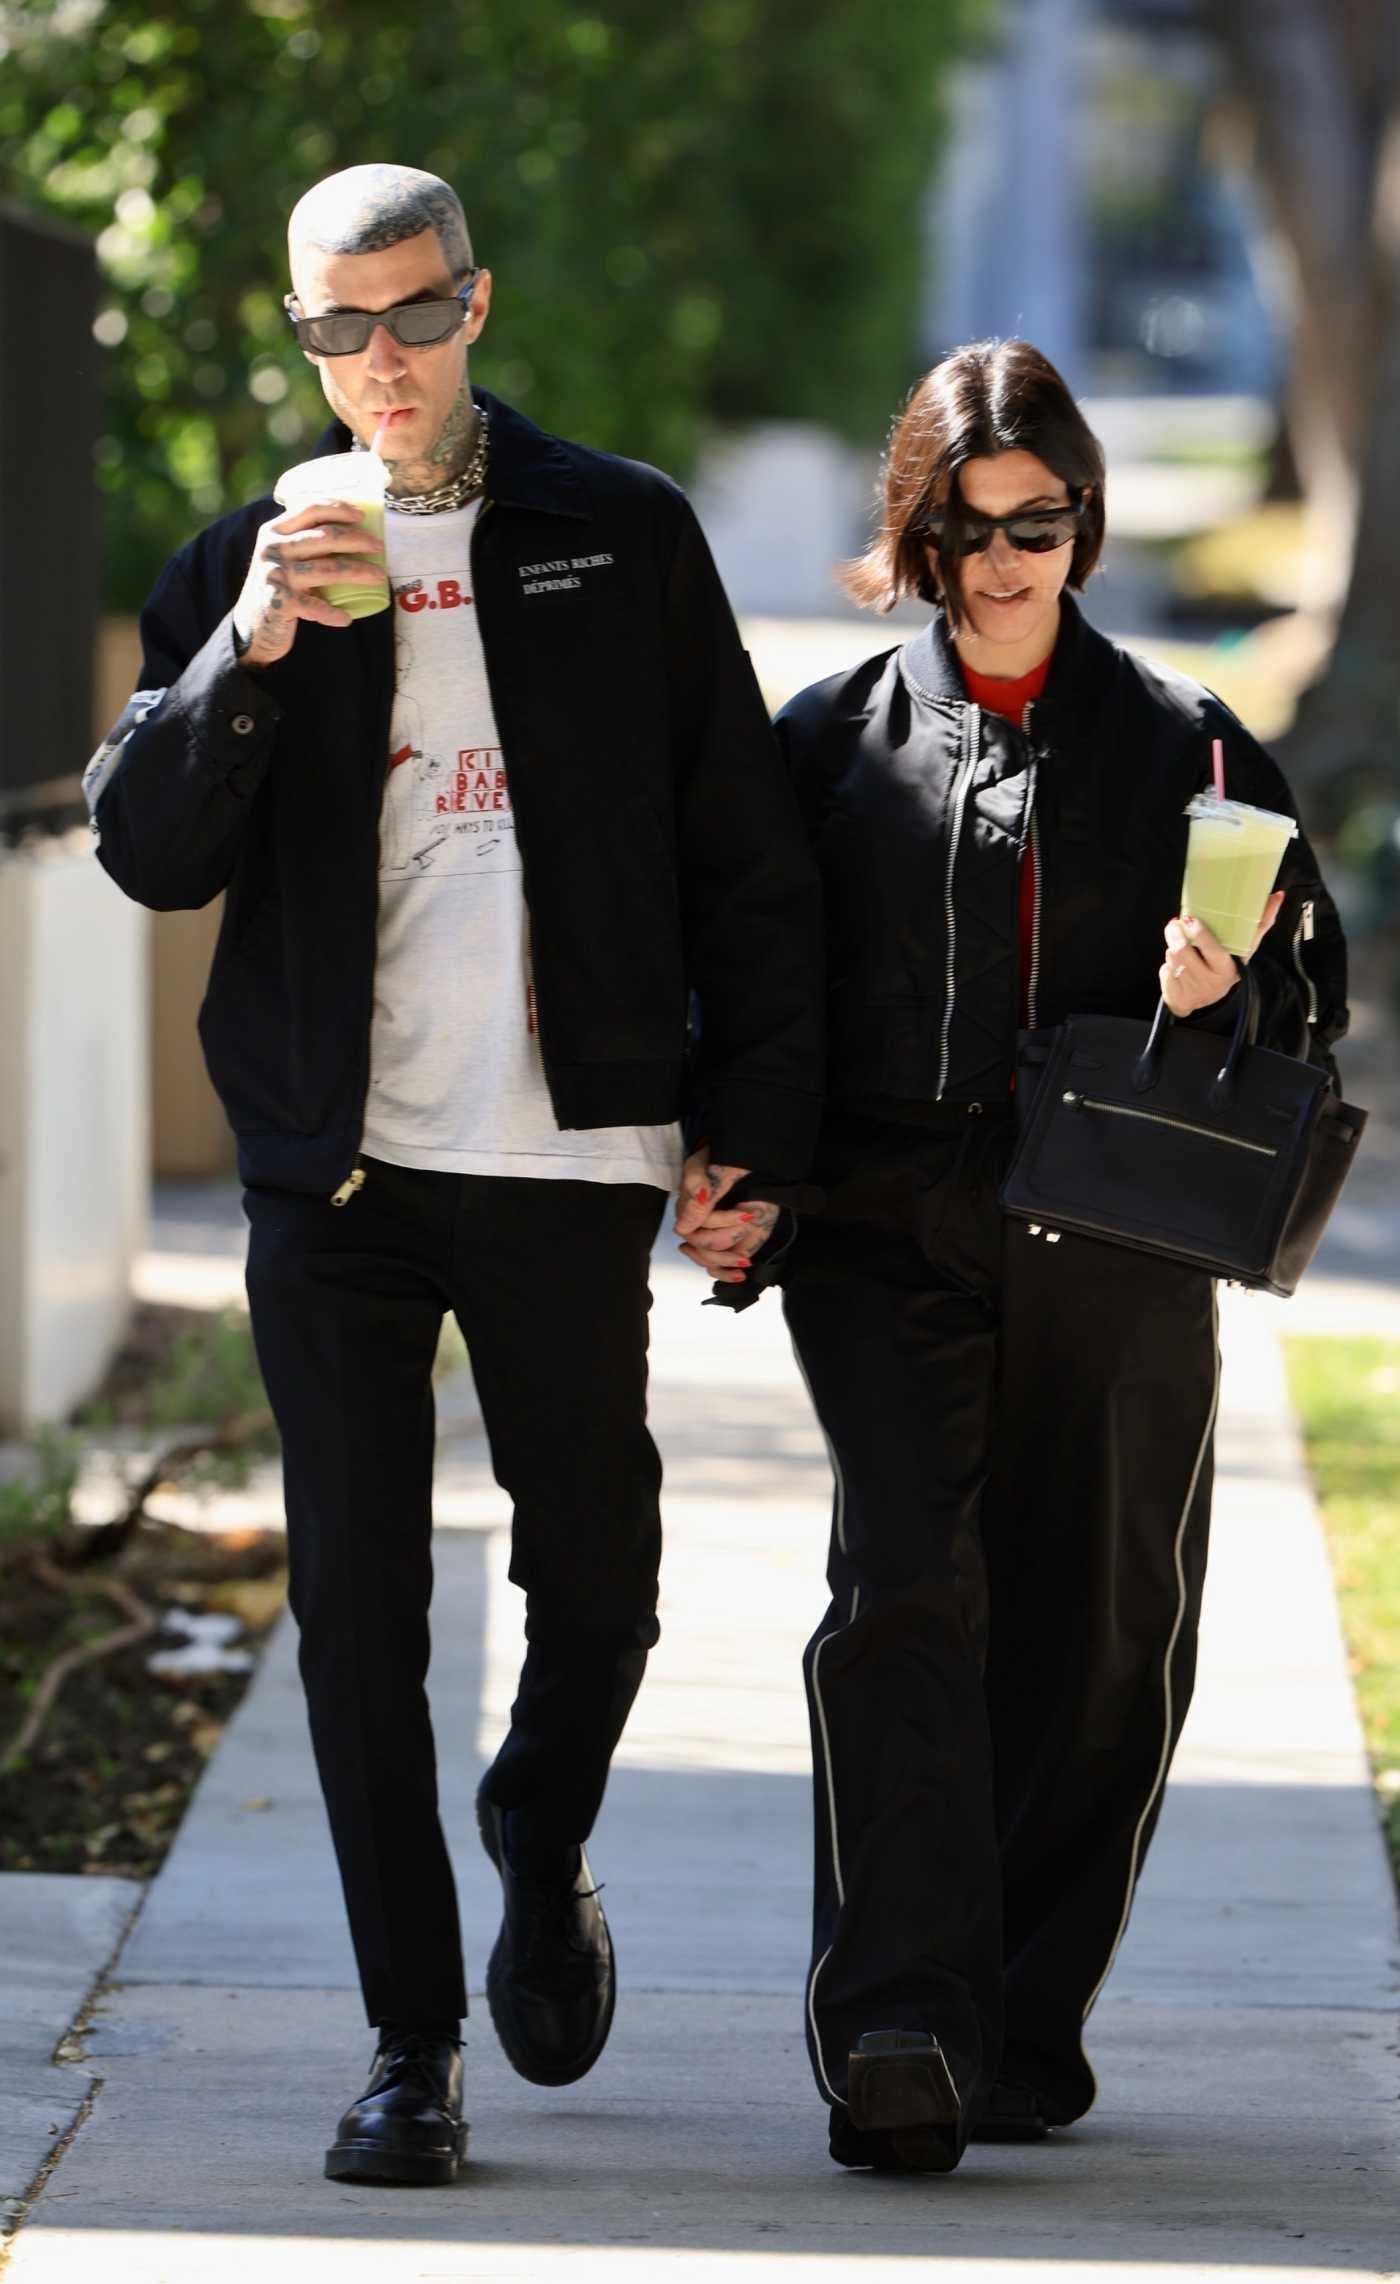 Kourtney Kardashian in a Black Bomber Jacket Was Seen Out with Travis Barker in West Hollywood 02/20/2023